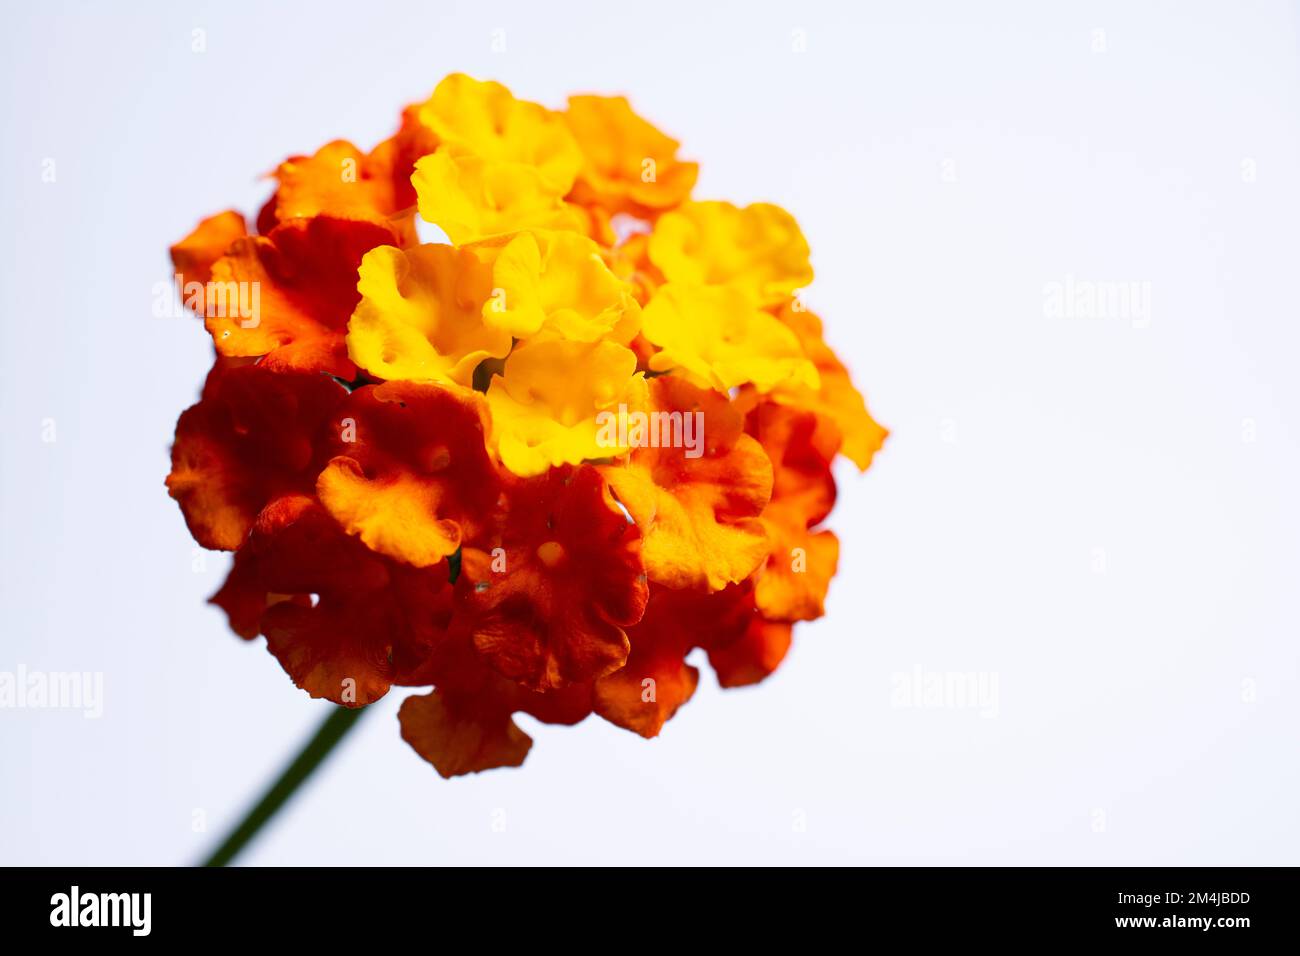 Lantana camara, commonly called lantana, is a shrub in the genus Lantana. It is native to Central and South America.It is included in the list of 100 Stock Photo